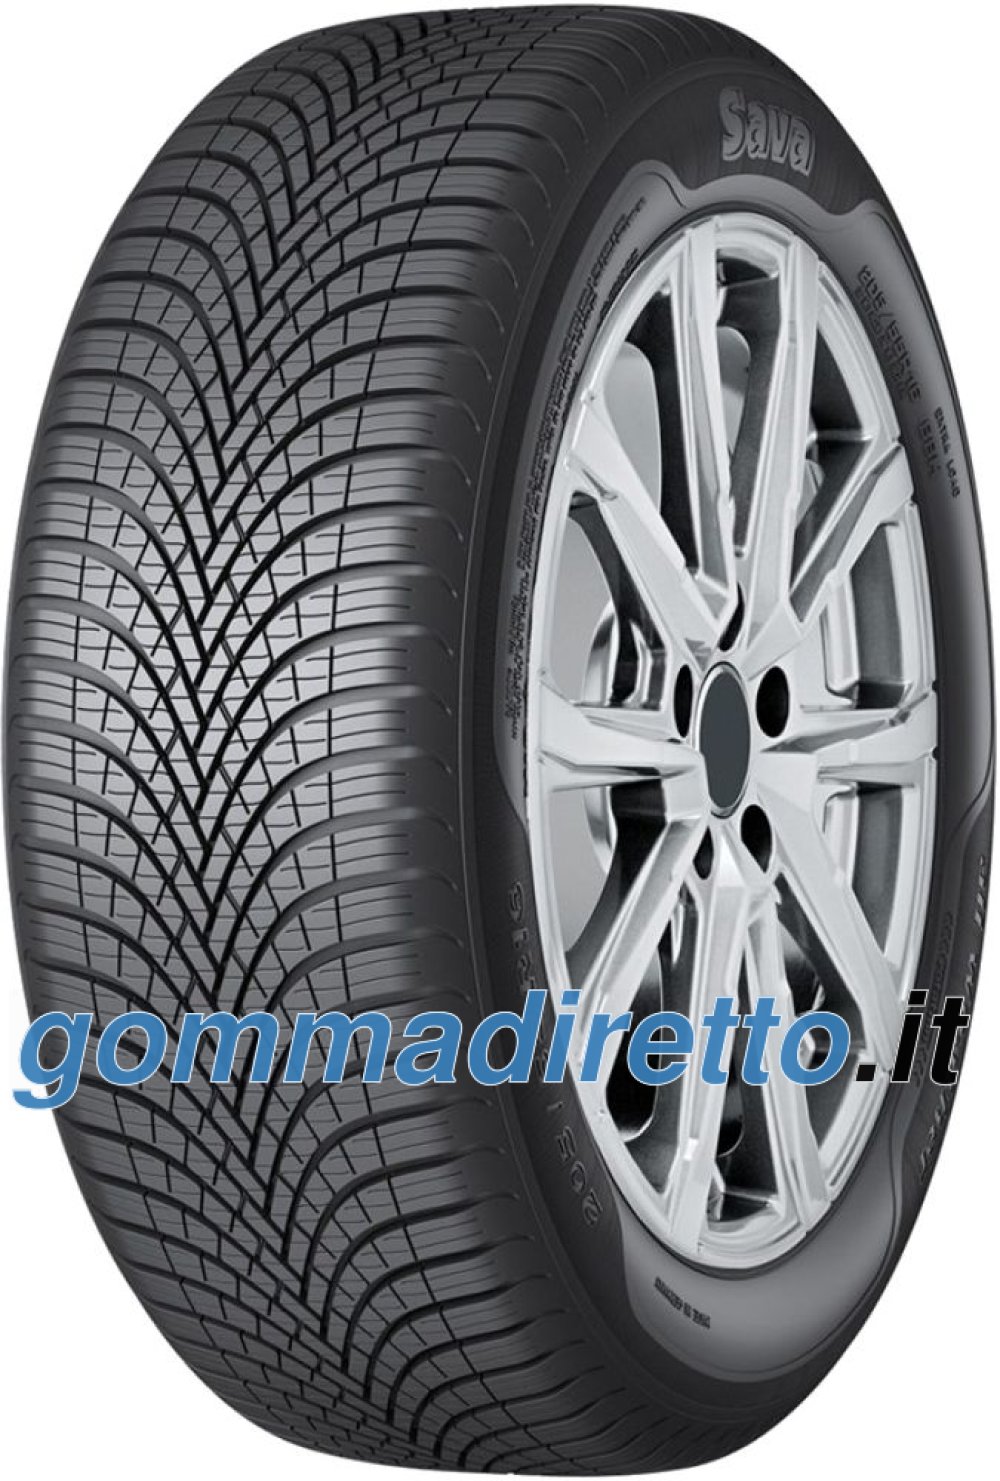 Image of Sava All Weather ( 205/55 R16 94V XL )